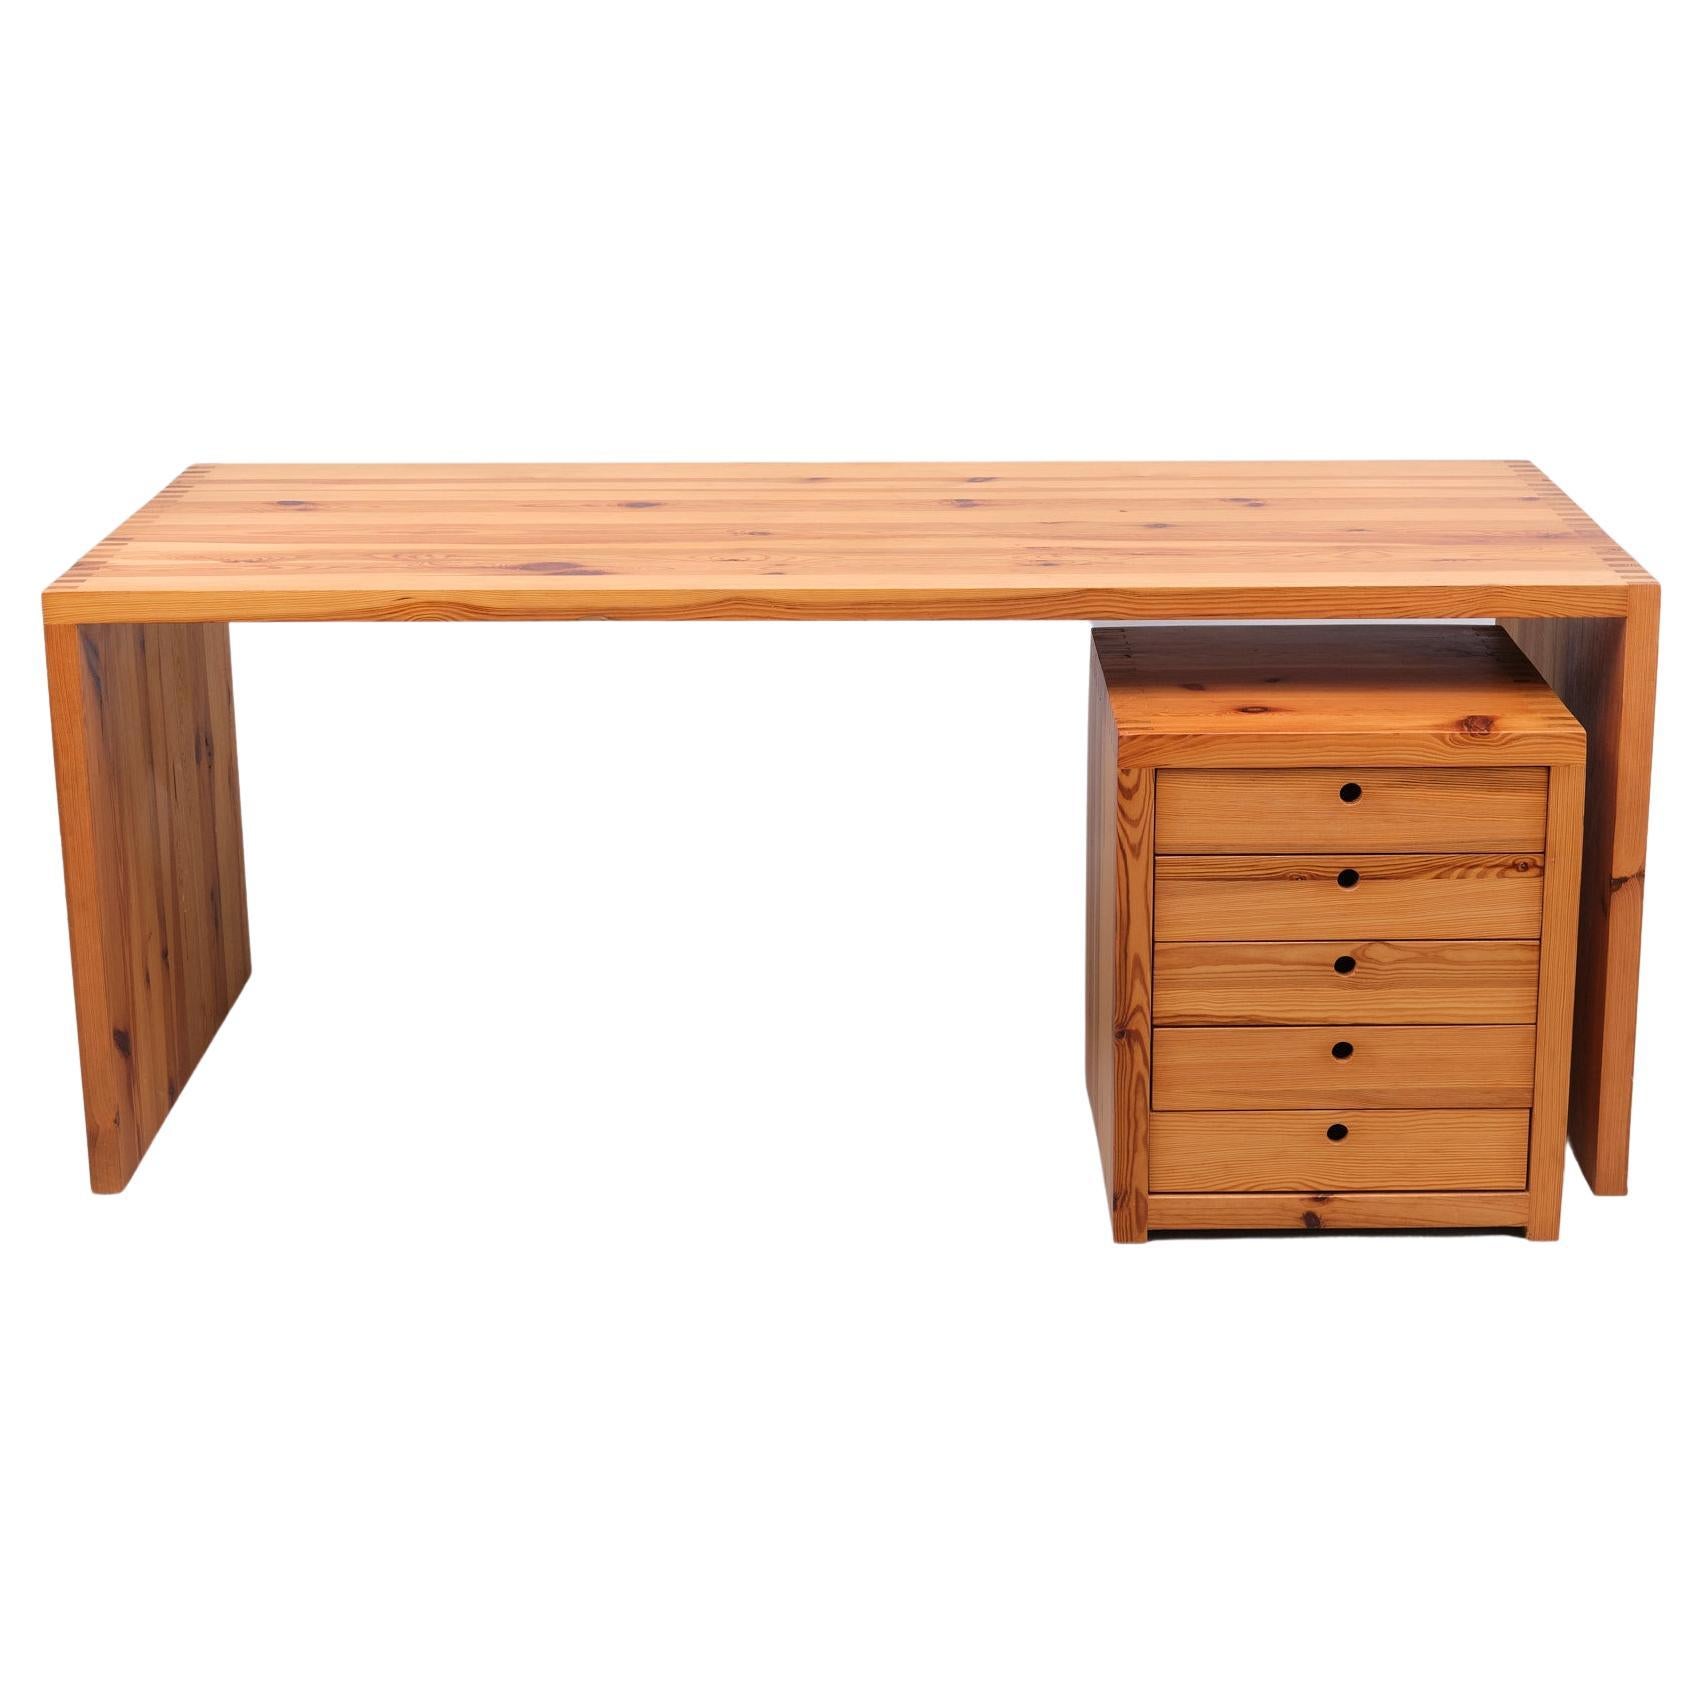 Minimalist  Solid Pine Writing desk designed by Ate Van Apeldoorn and produced by Houtwerk Hattum in Holland in the 1960’s. Features a pinewood cabinet block with drawers that can be put underneath the desk. Typical design features of a signature